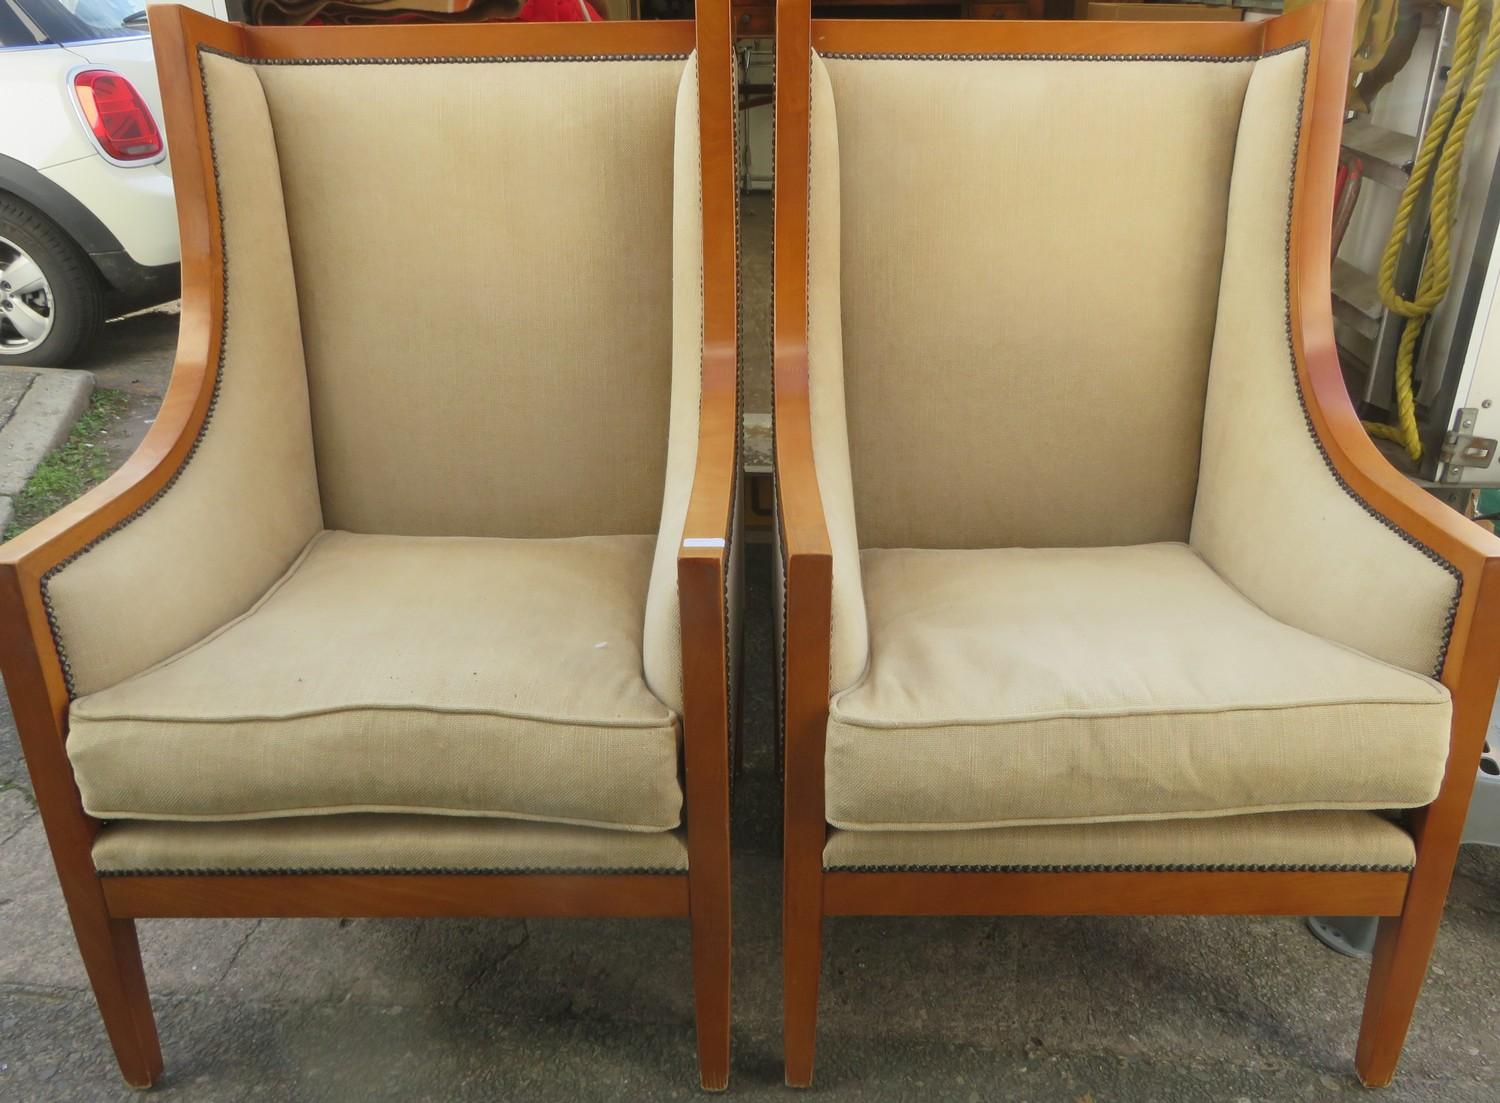 Pair of 20th century upholstered highback armchairs. Approx. 112cm H x 69cm W x 75cm D